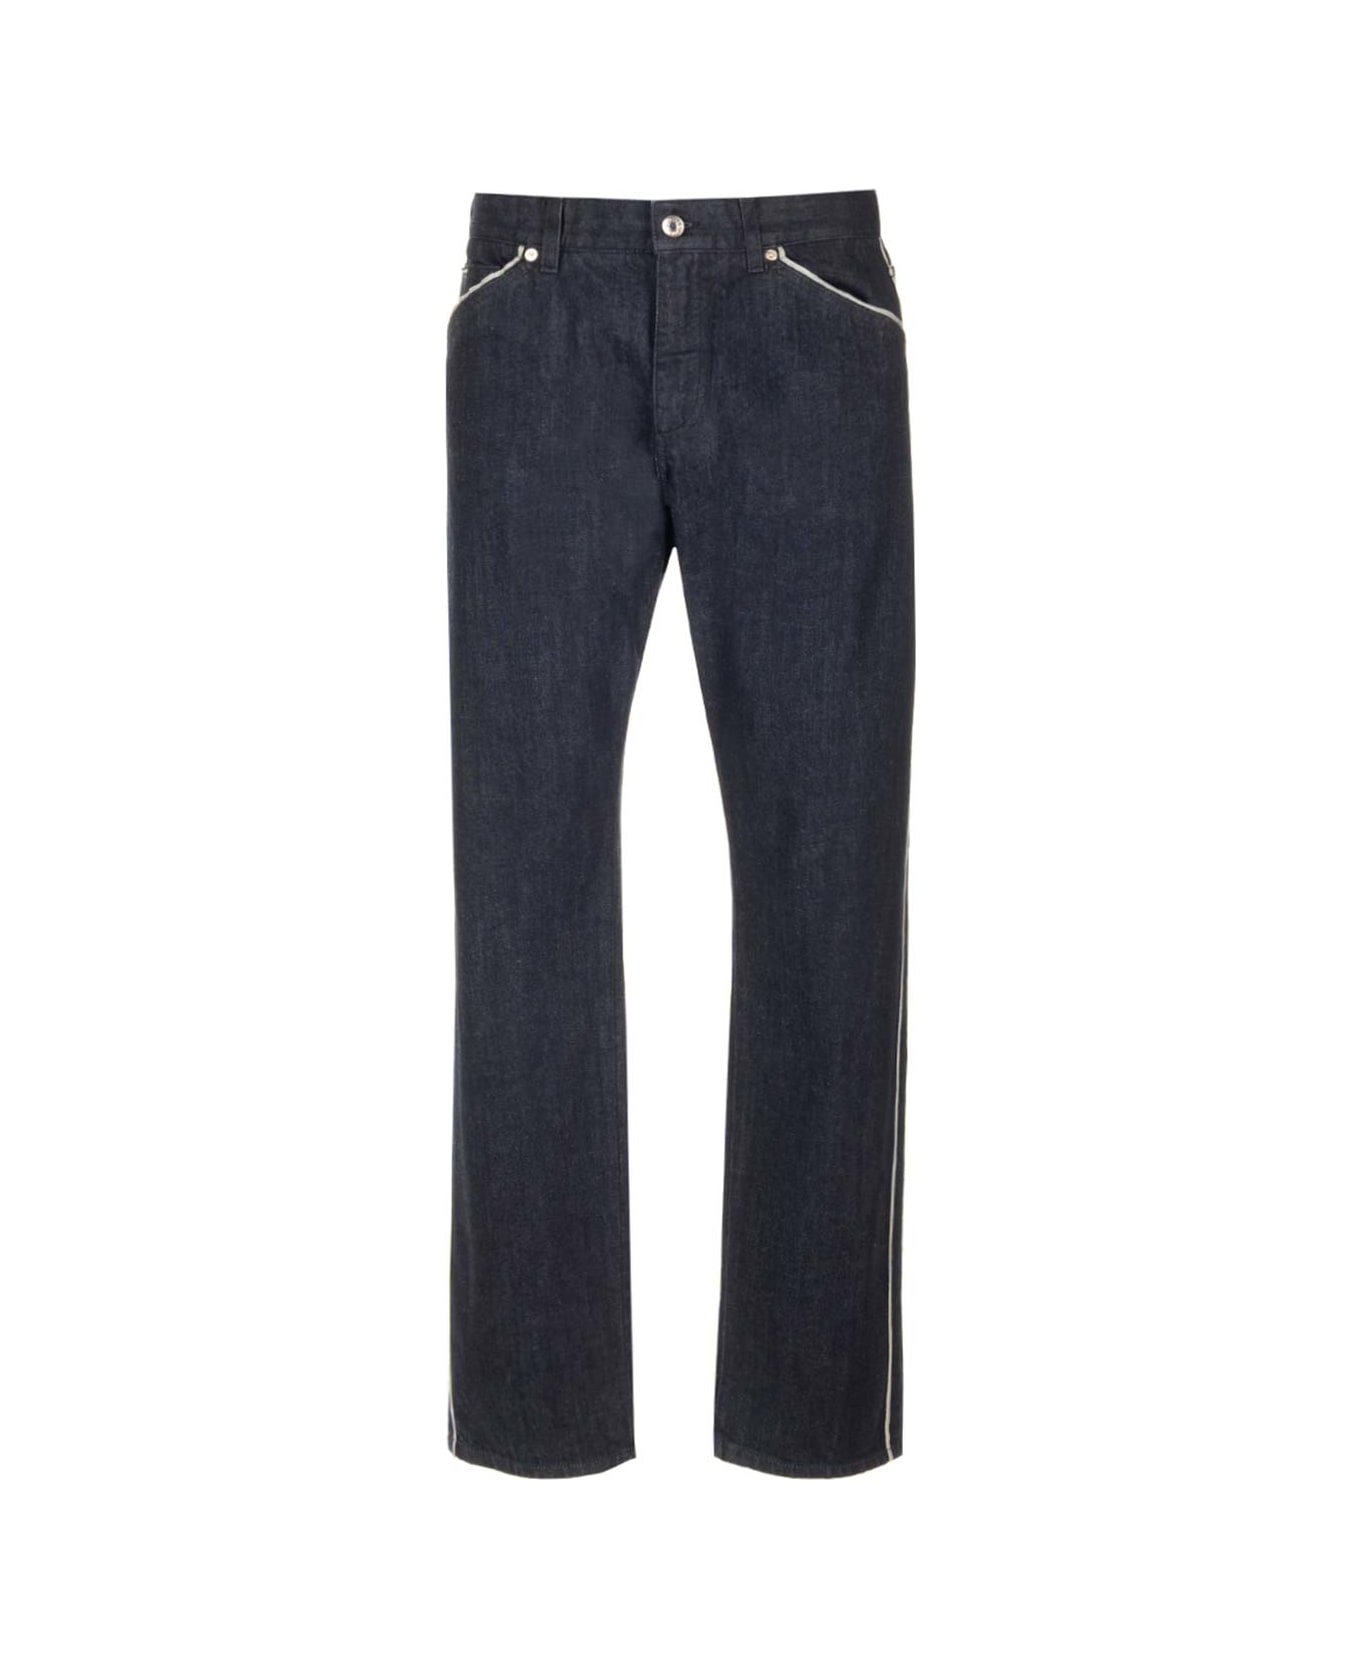 Dolce & Gabbana Contrasting Profiles Jeans